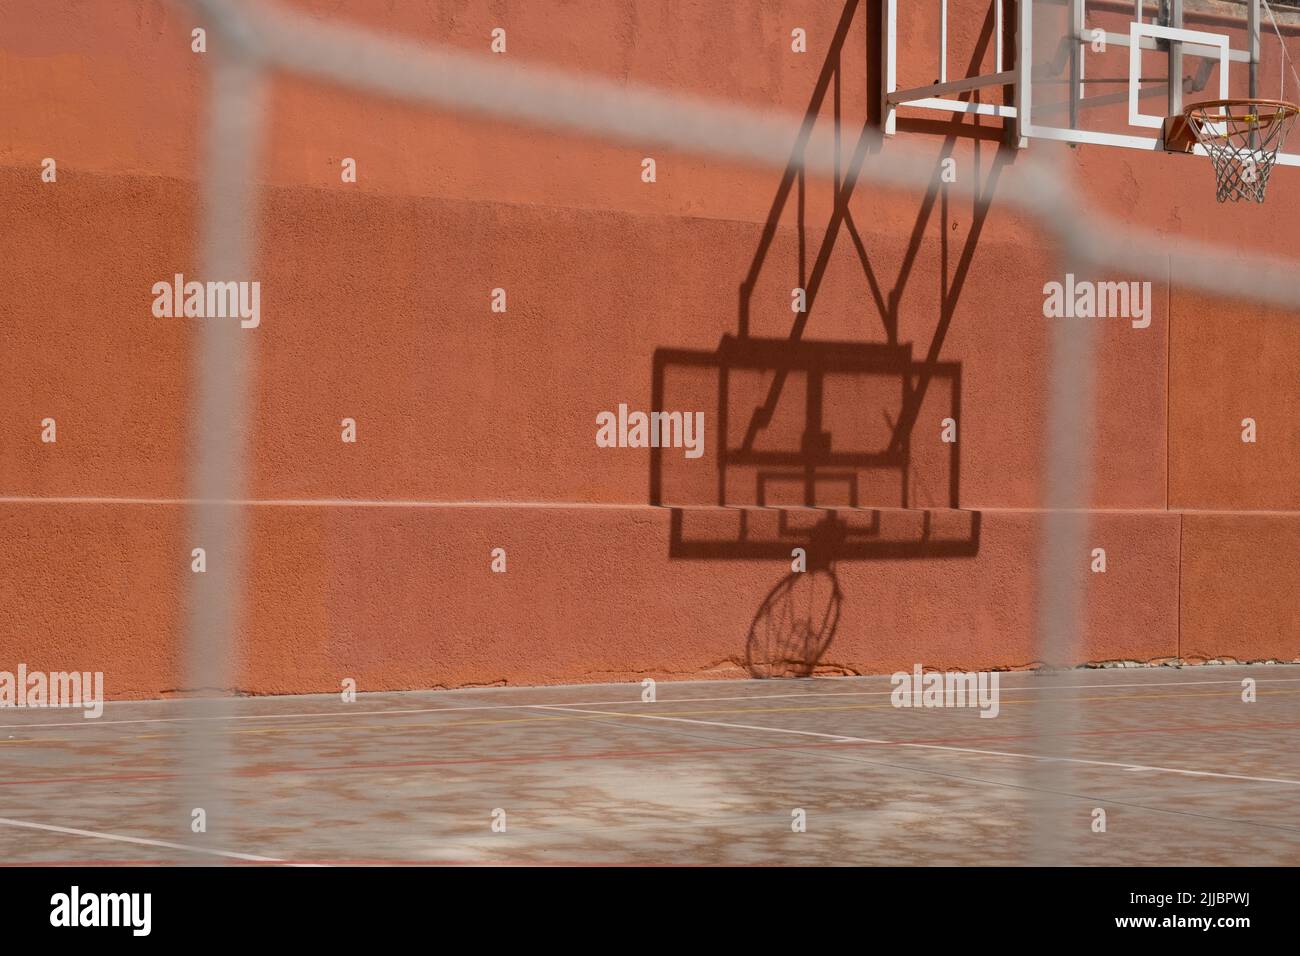 View from low angle of outdoor basketball backboard on a sunny day, shadow reflected on orange wall. Urban sports court.Blurred close-up of the fence. Stock Photo